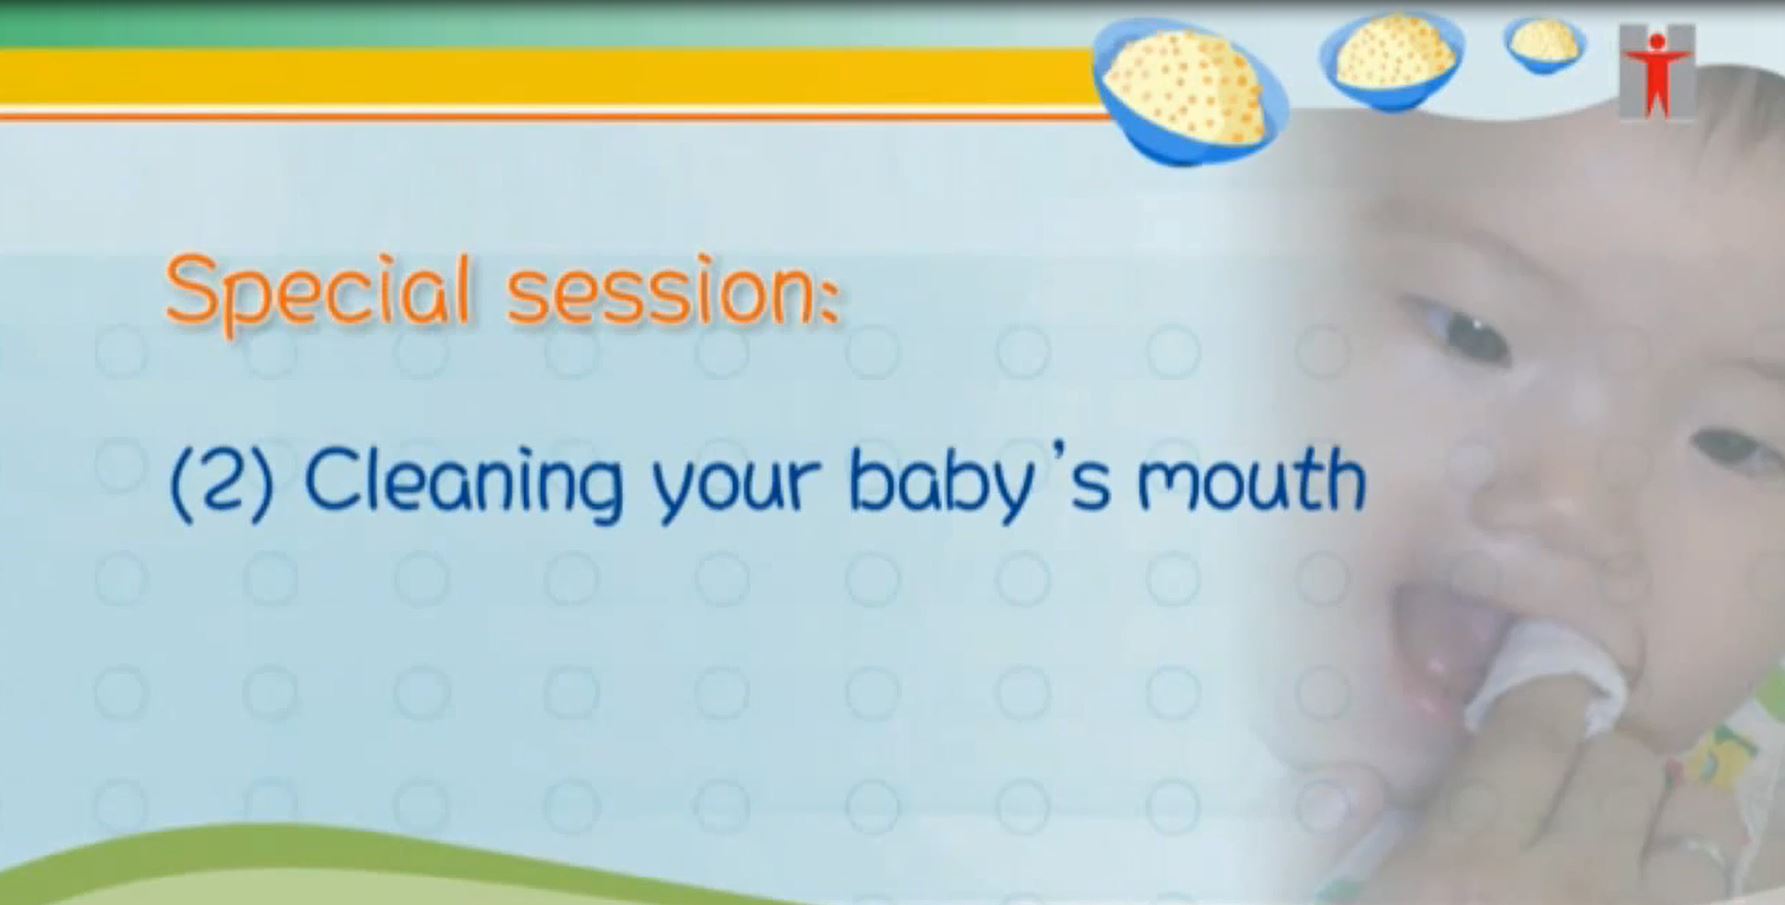 Cleaning your baby's mouth